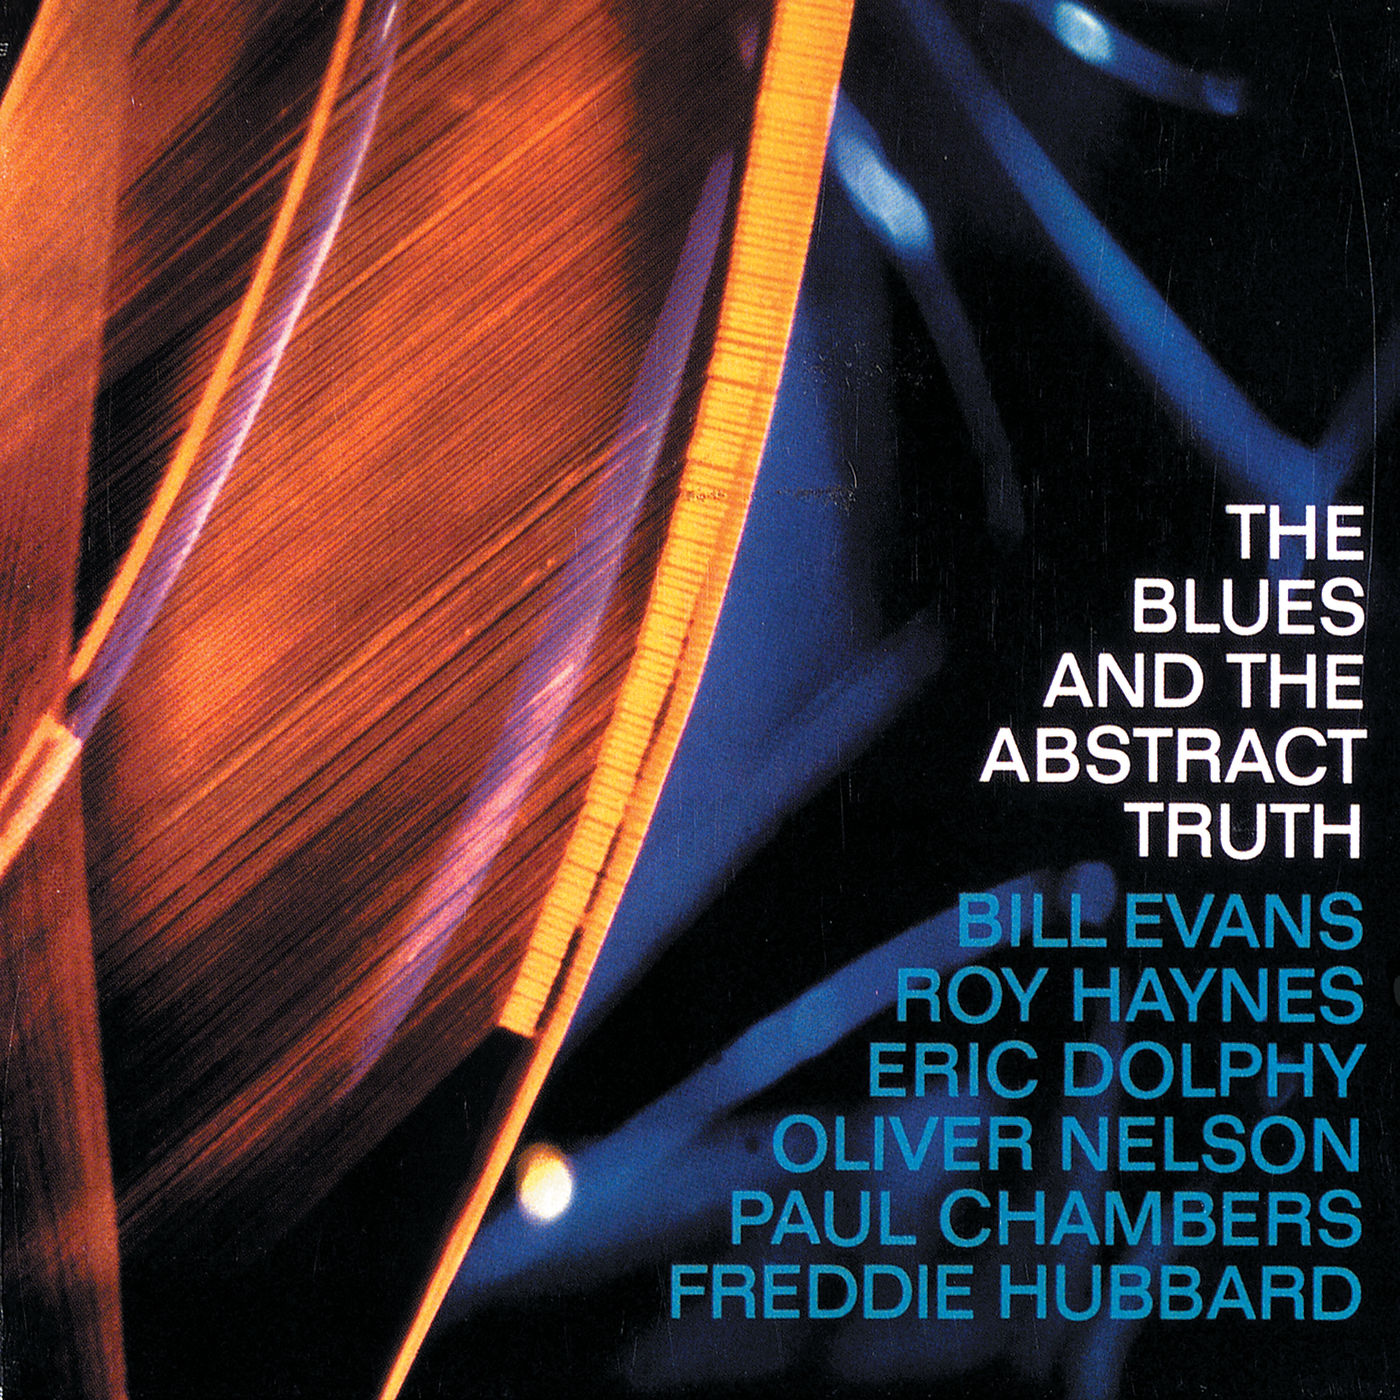 Oliver Nelson - The Blues And The Abstract Truth (1961/2021) [FLAC 24bit/96kHz]